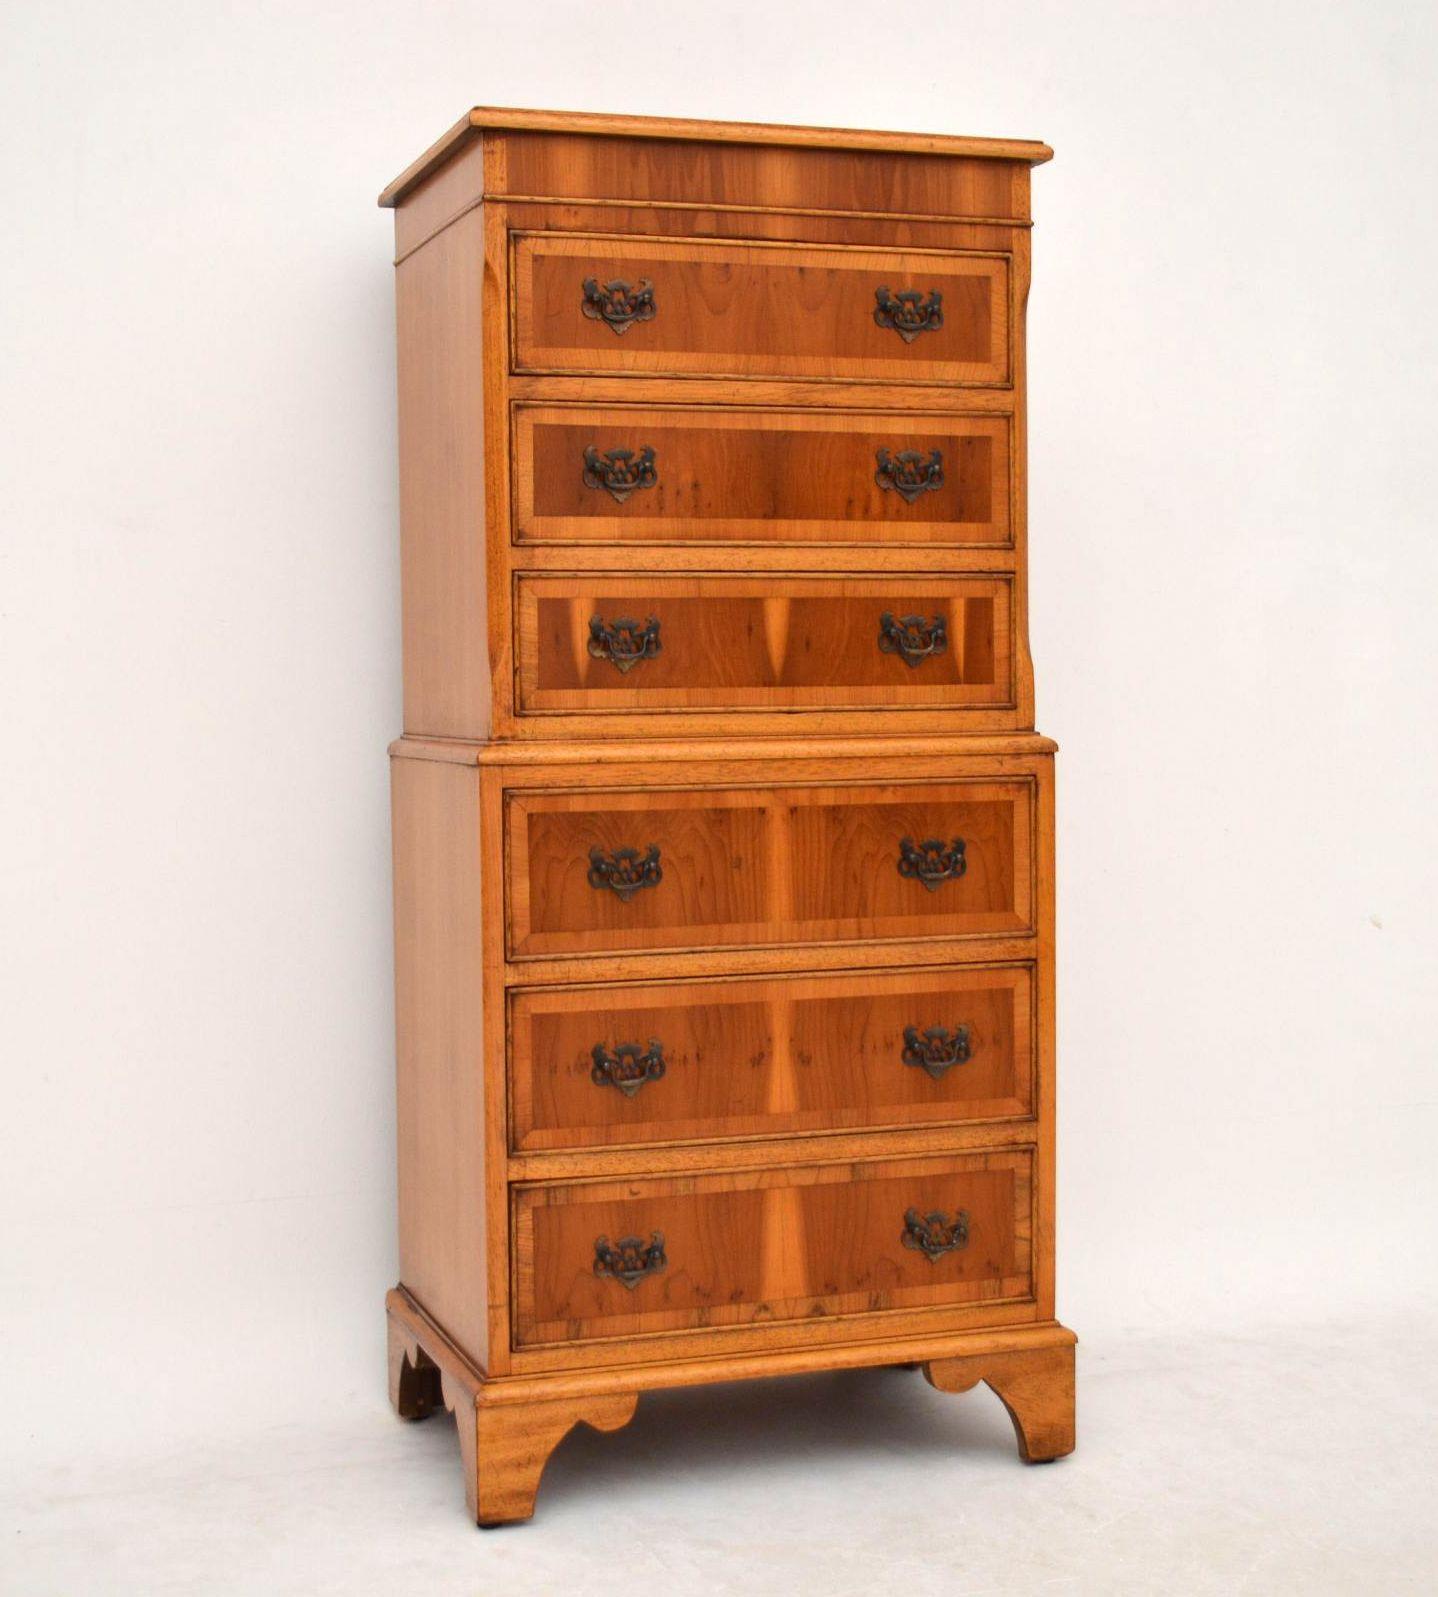 Antique Georgian style yew wood chest on chest in lovely original condition, with a beautiful grain to the wood and it dates to circa 1930s-1950s period. It has a crossbanded top, 6 graduated drawers with original brass handles and sits on bracket